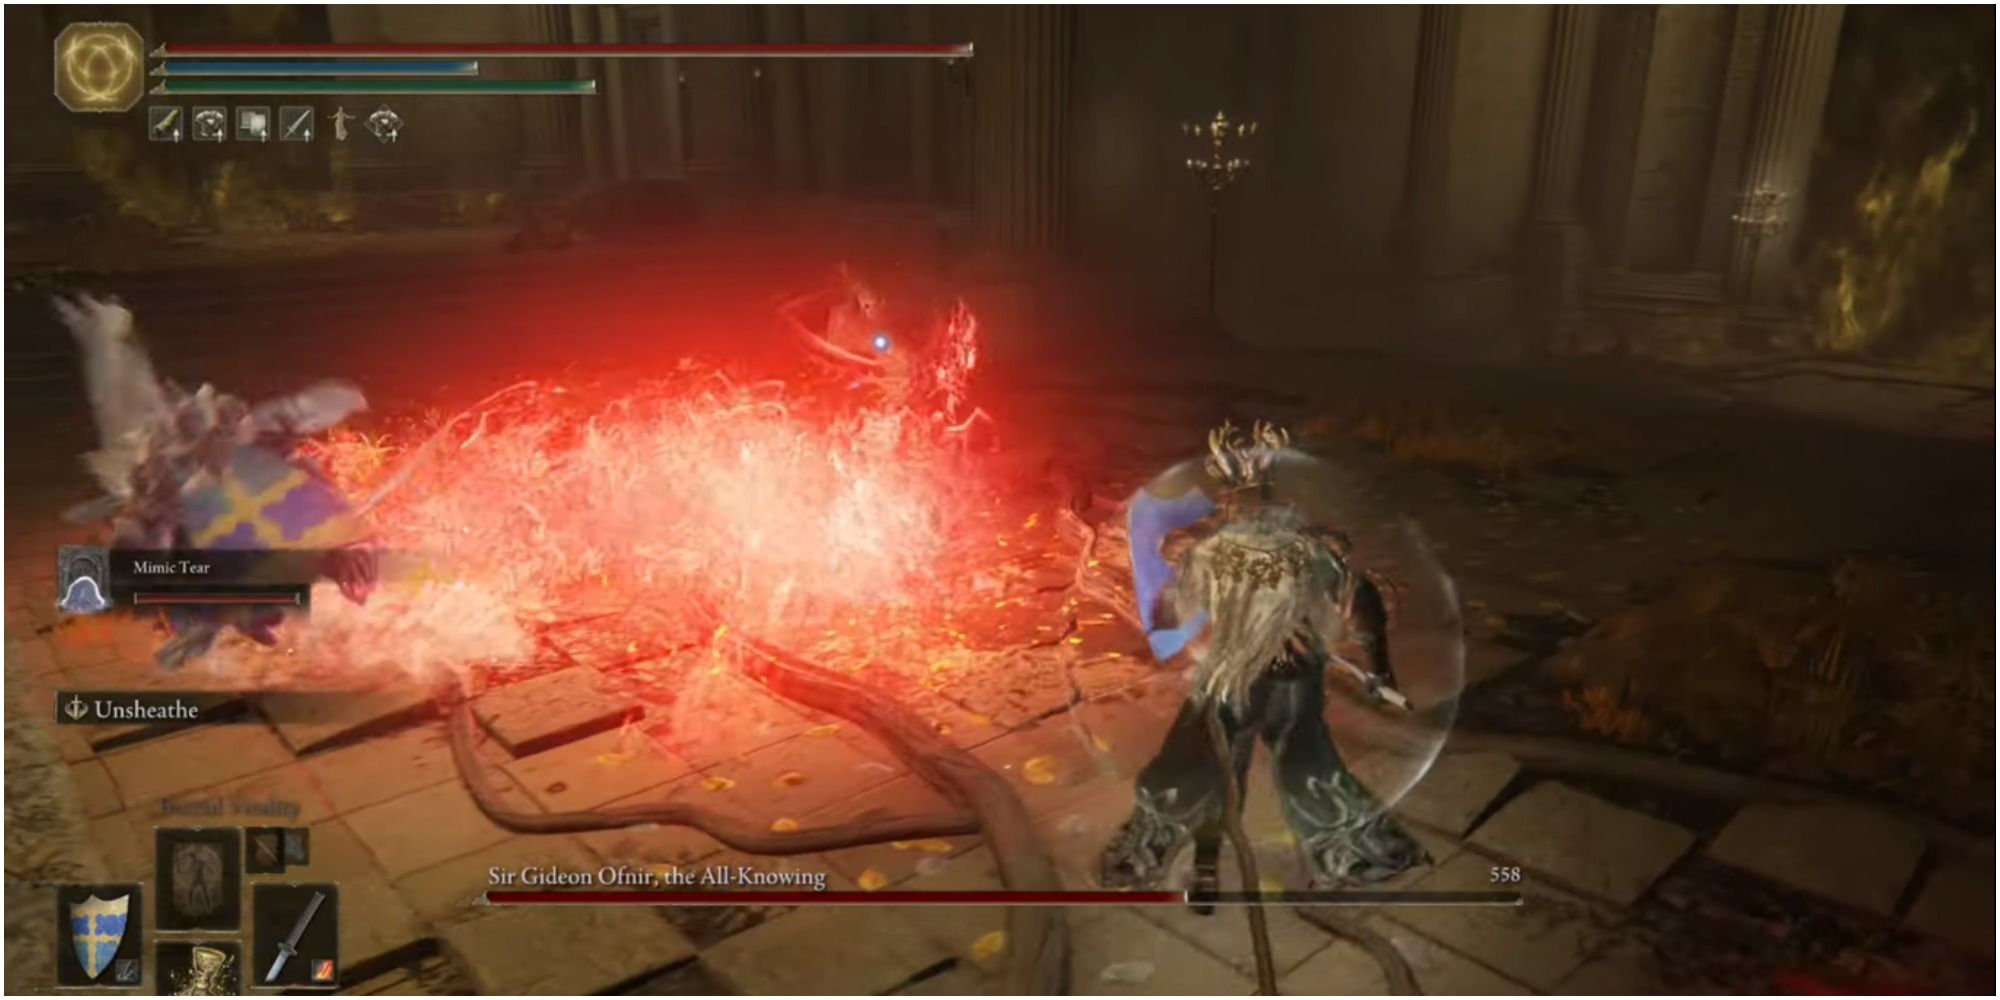 The boss throwing a steam of blood on the player.